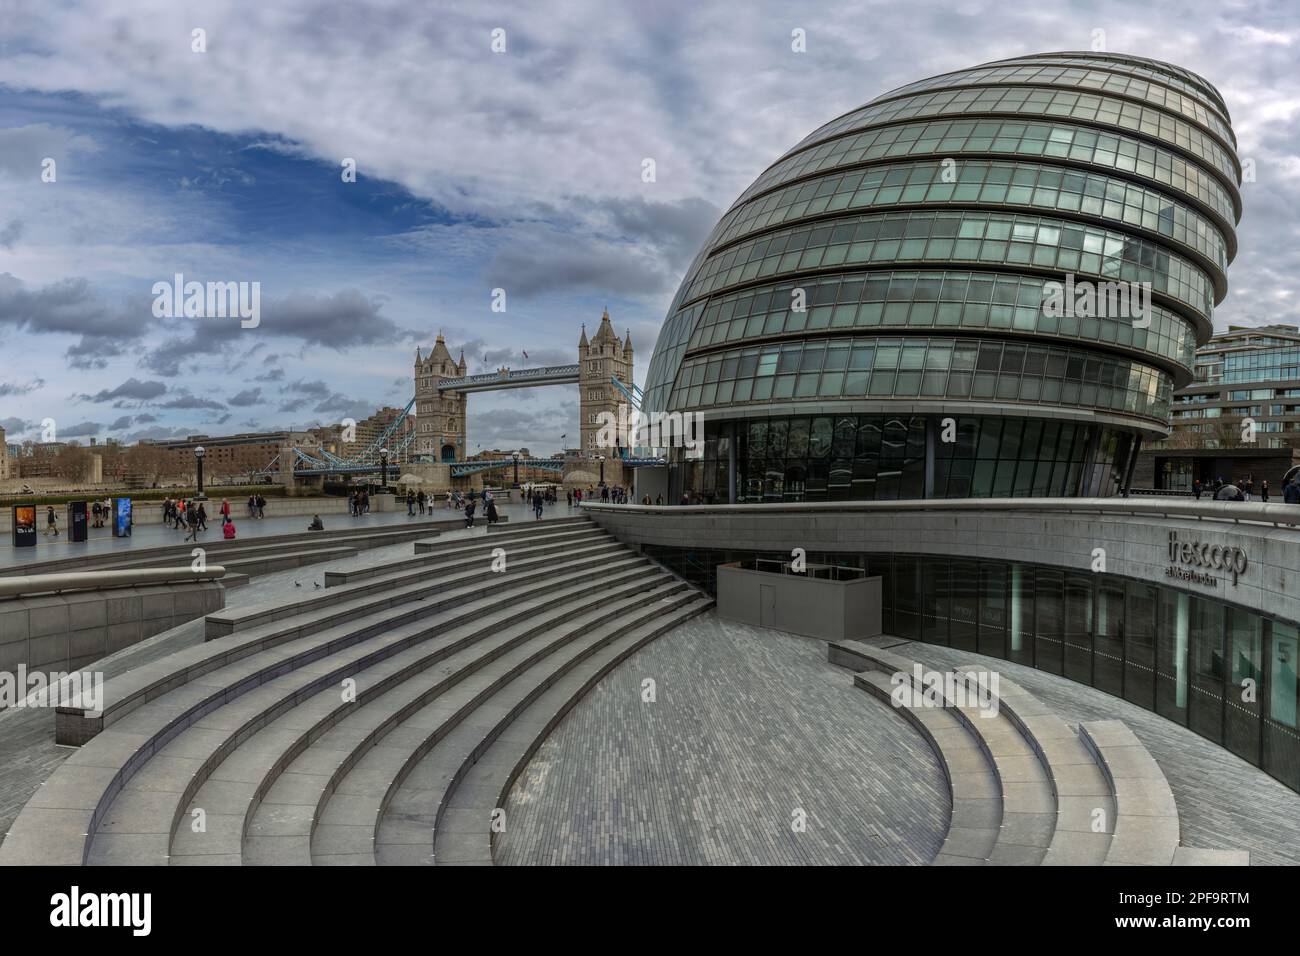 The Scoop is an outdoor ampitheatre situated on the south side of the River Thames near Tower Bridge in central London. Located next to City Hall, the Stock Photo